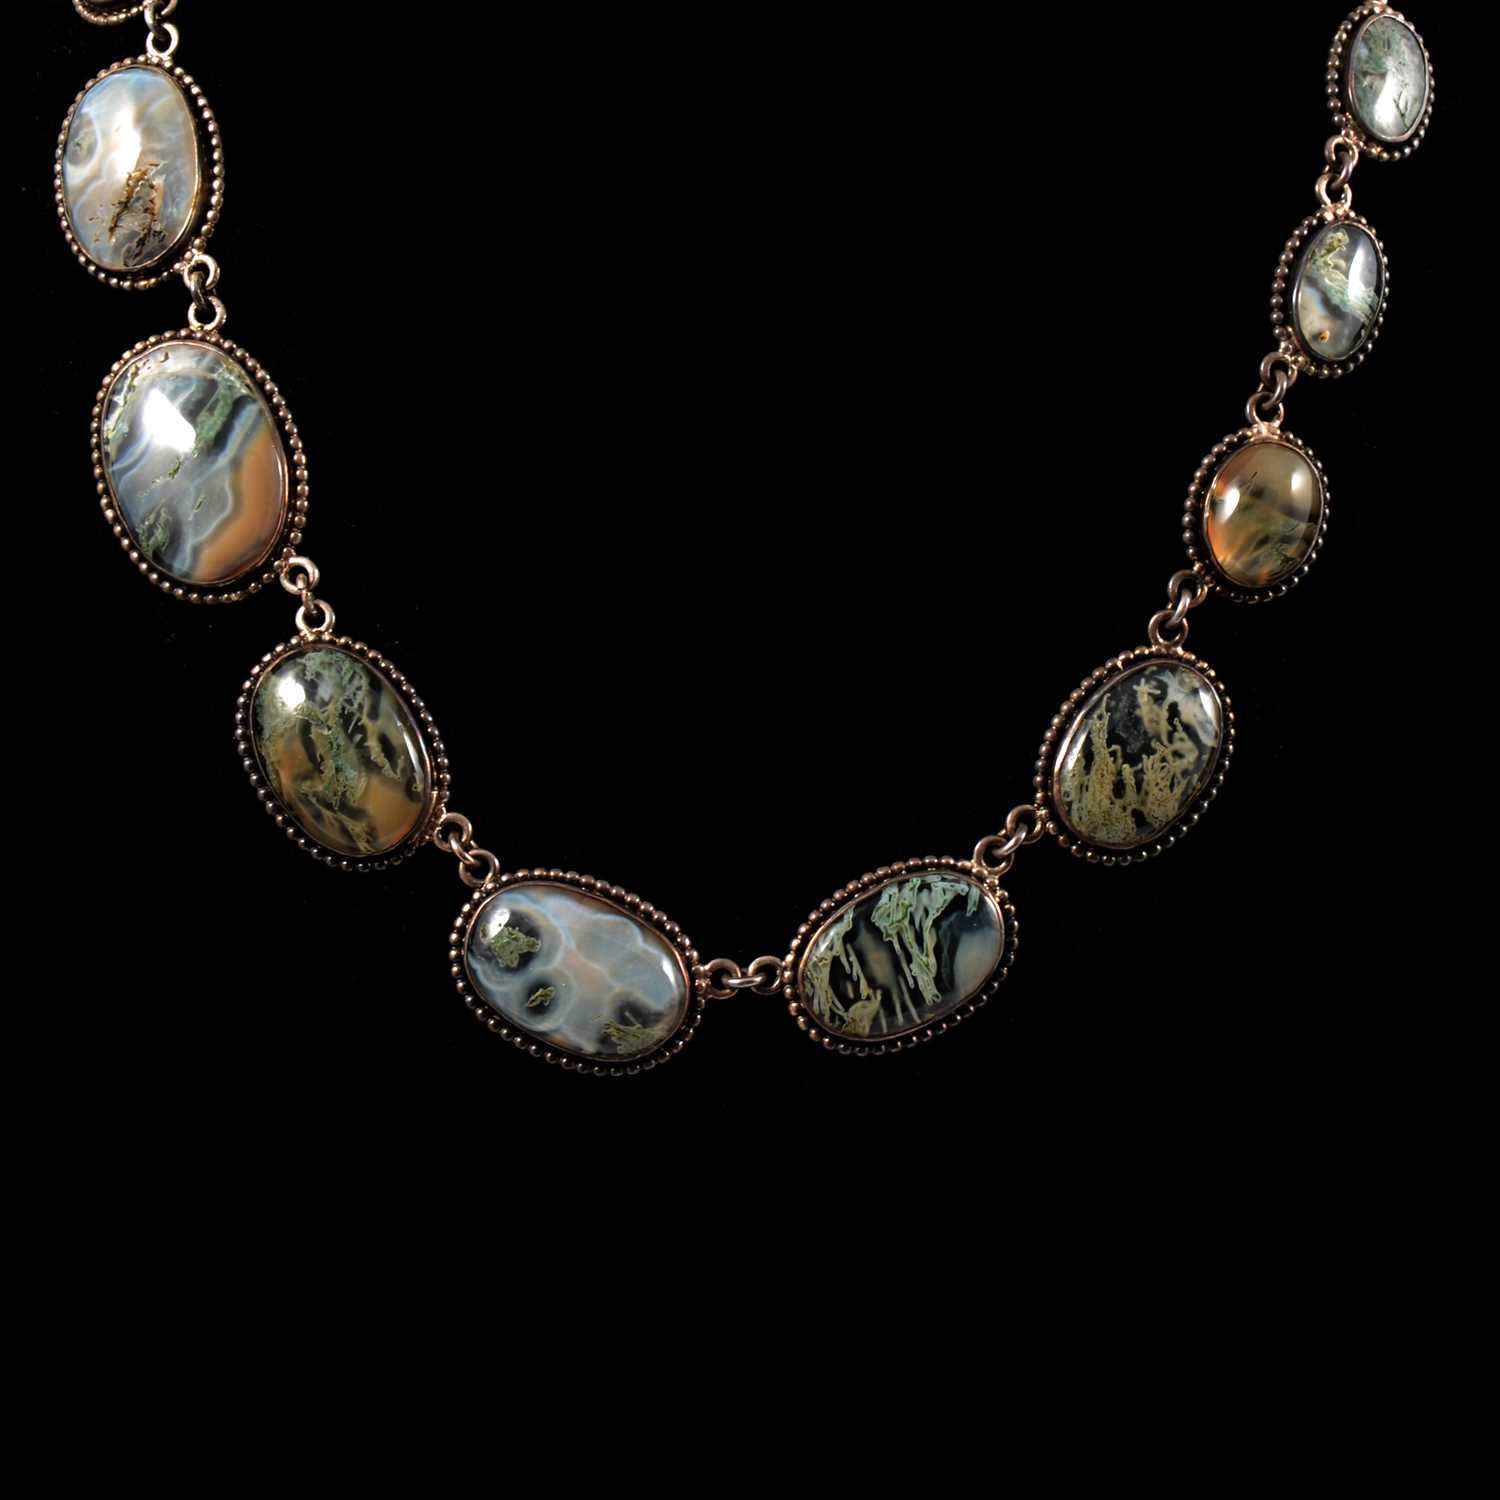 Lot 104 - A moss agate necklace and brooch in a large fitted necklace box, not original